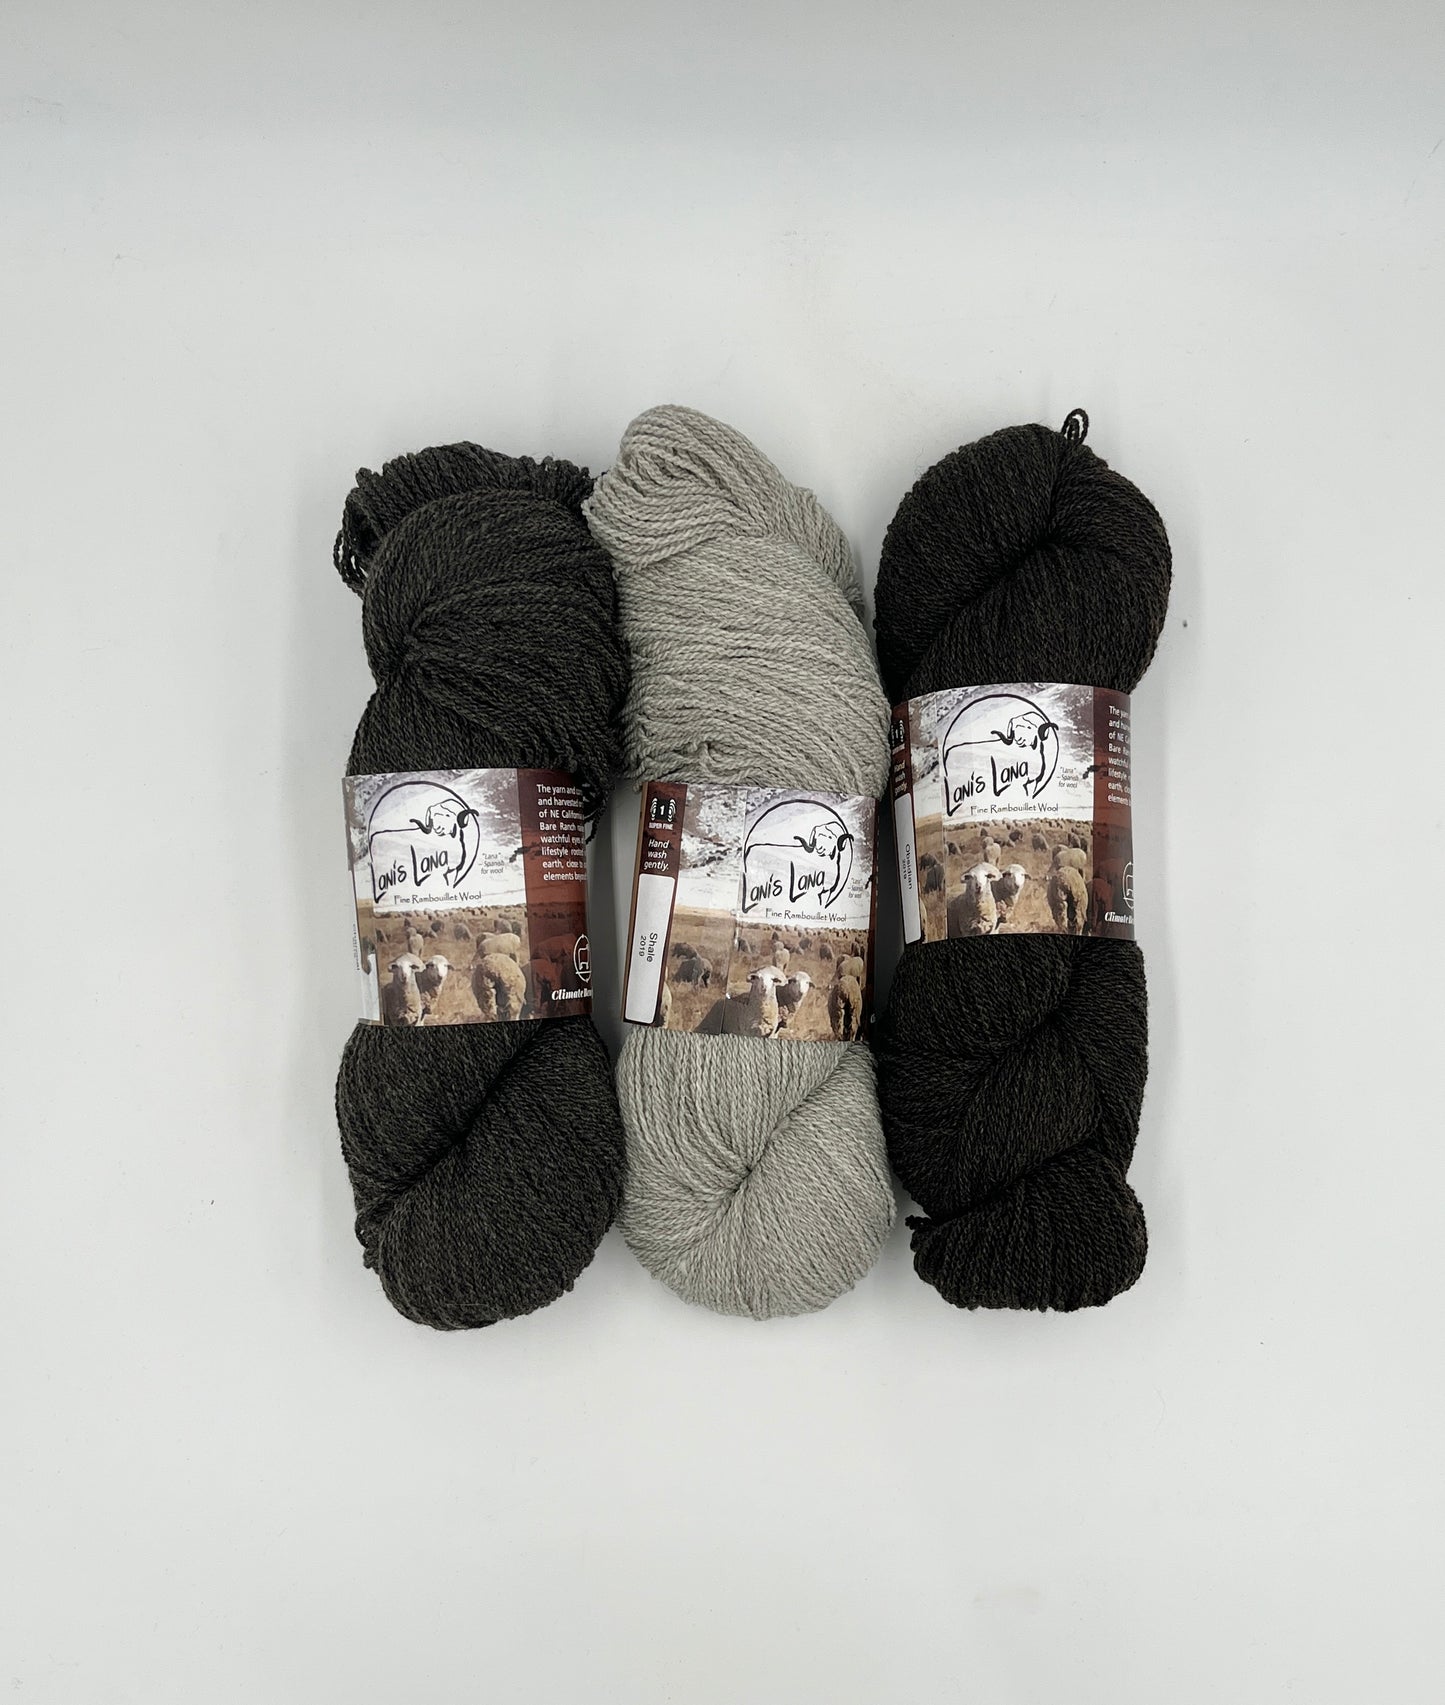 Hayes Range - Naturally Colored Fingering Weight Yarn